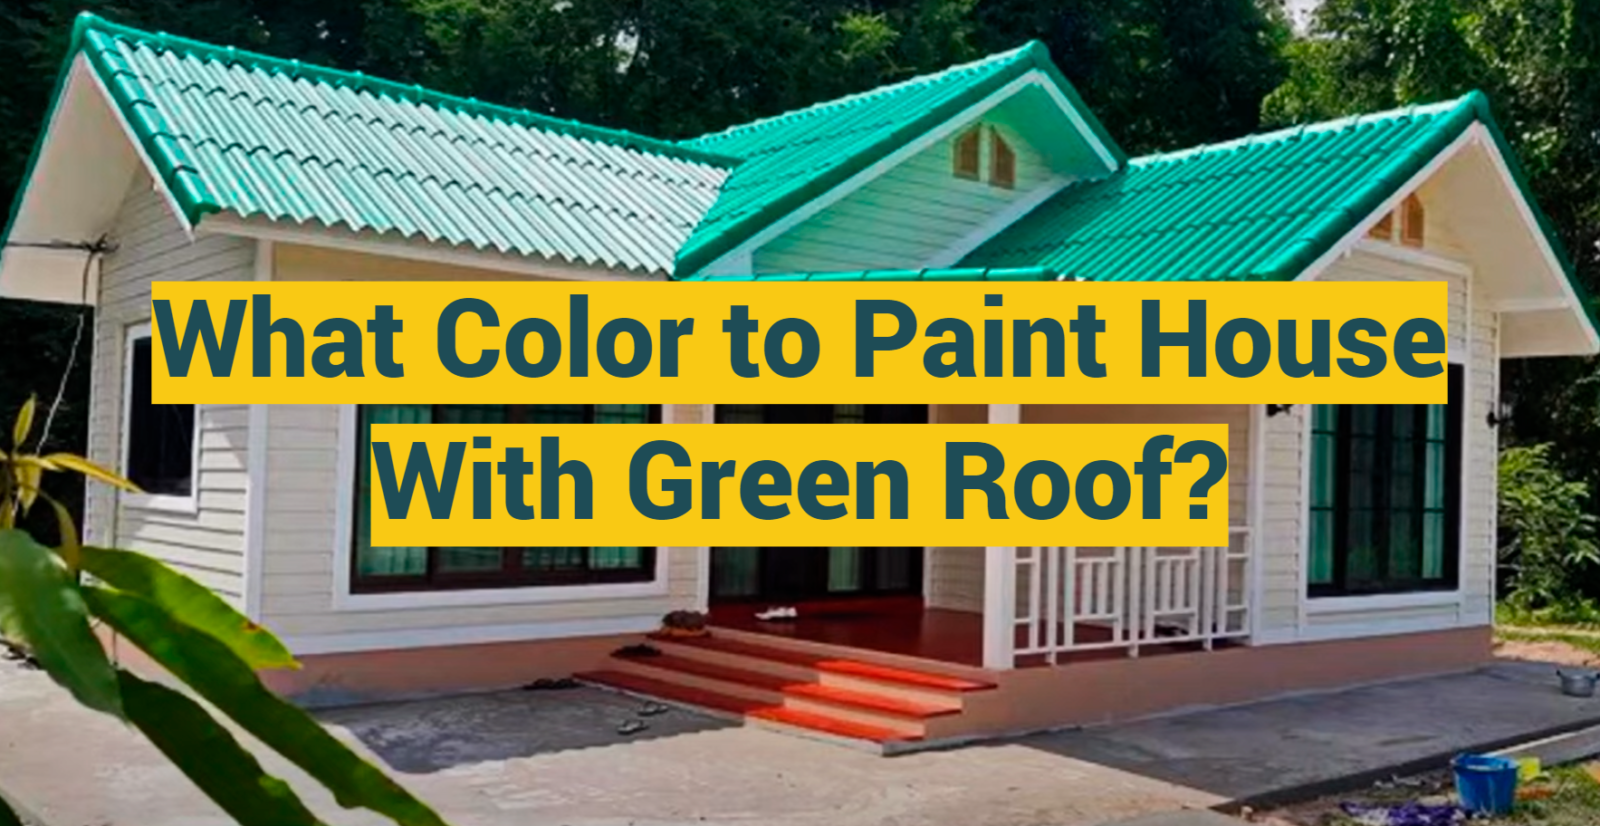 What Color to Paint House With Green Roof?